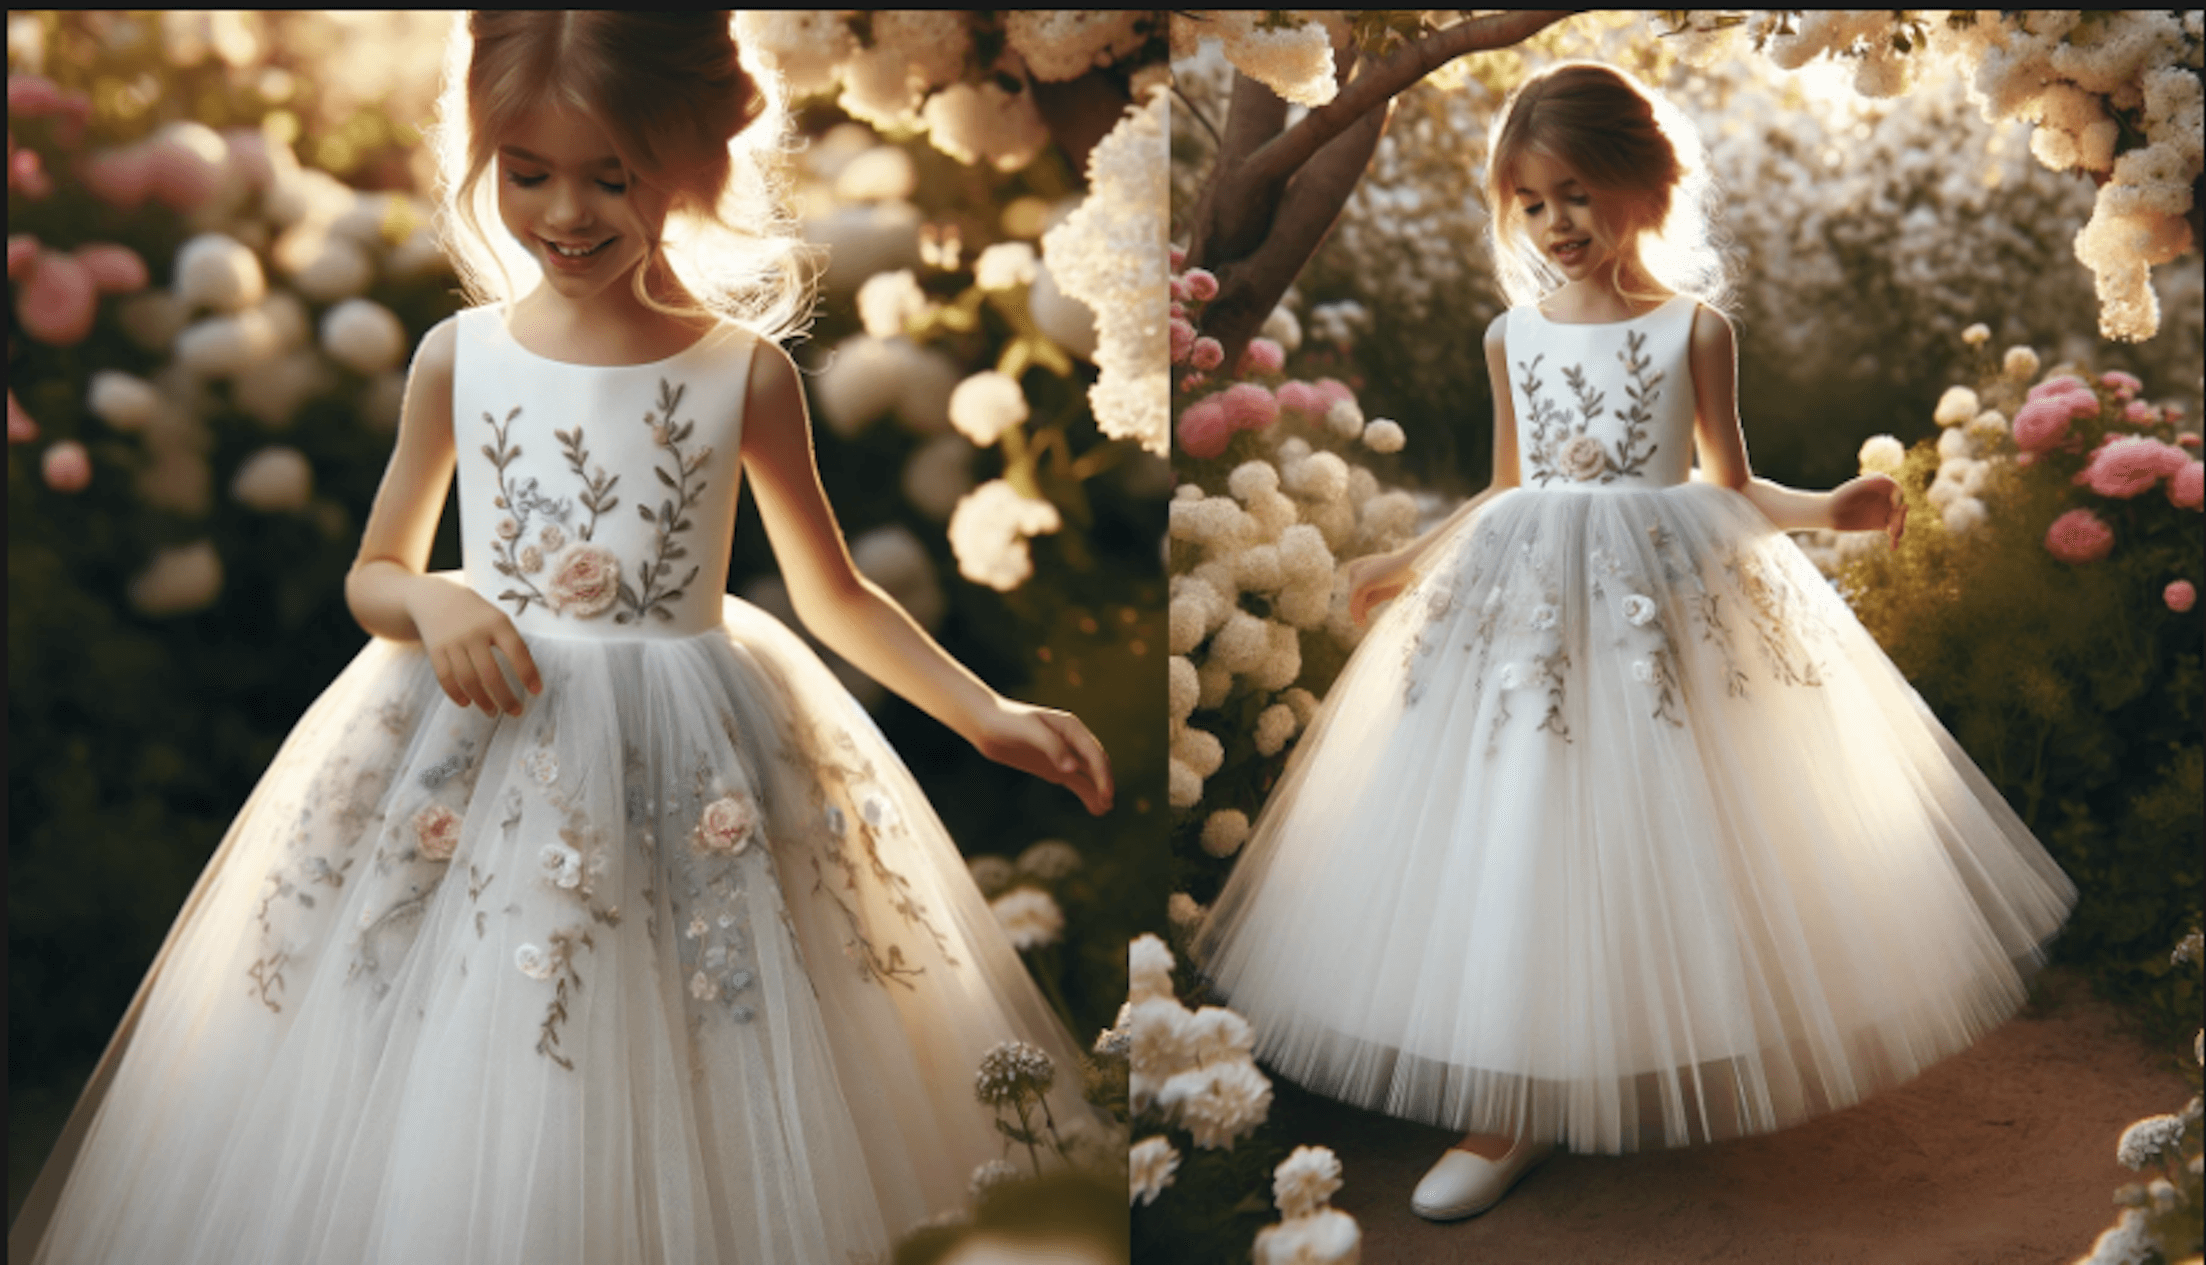 Dresses for Flowergirls: How to choose the perfect outfit for your little girl